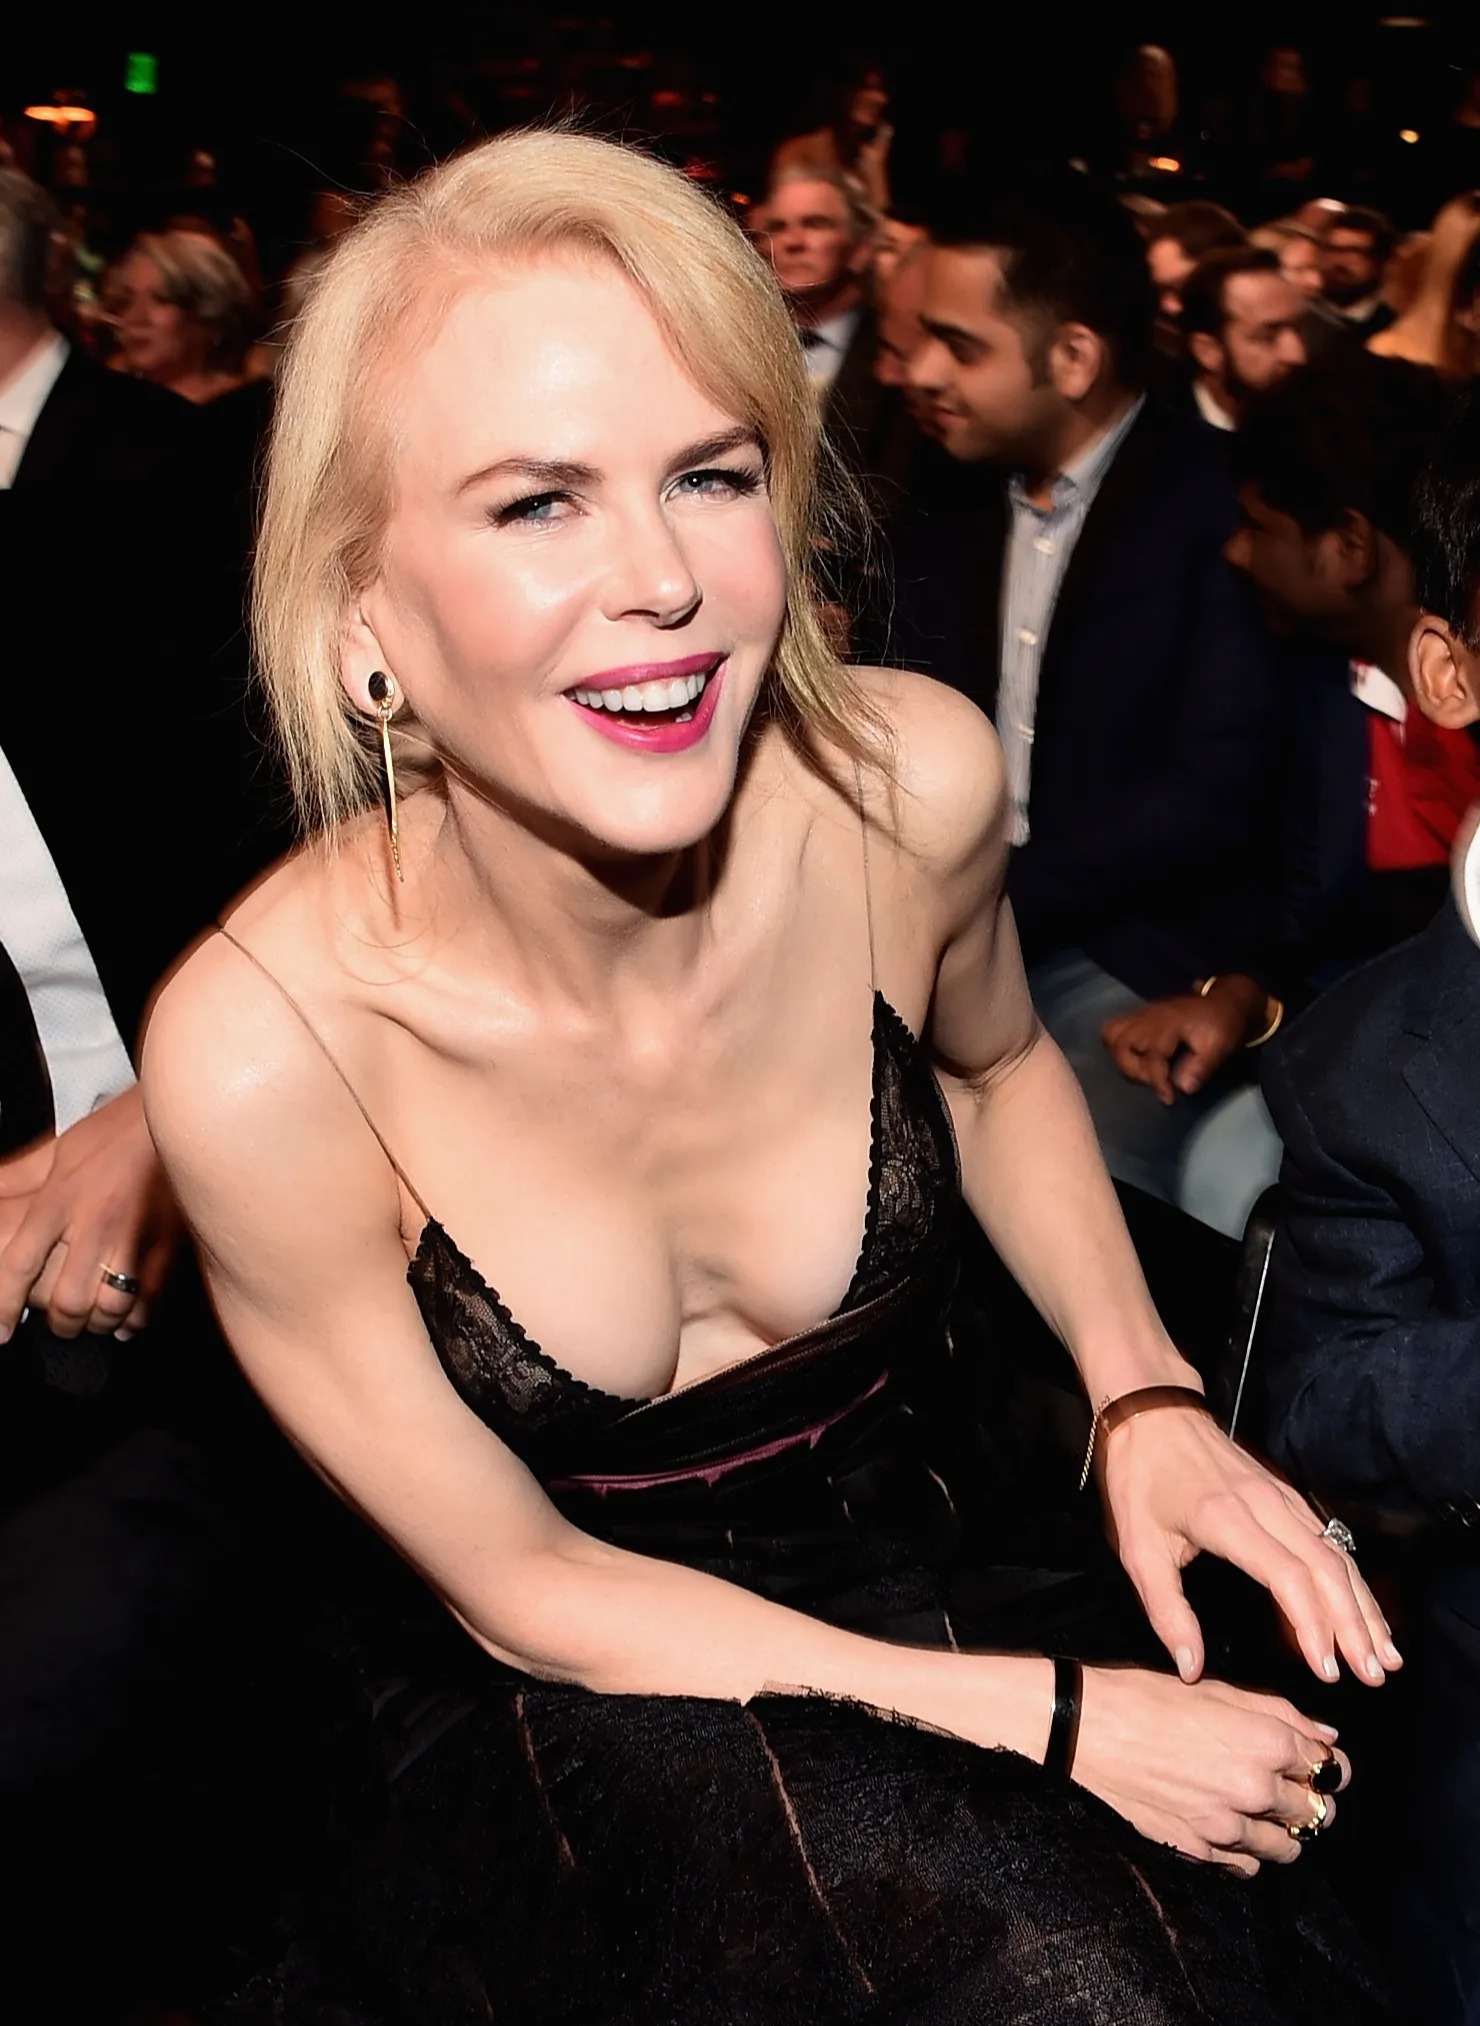 Nicole Kidman (seen here in 2017) has likely had a facelift to lift her jawline at some point, said an expert